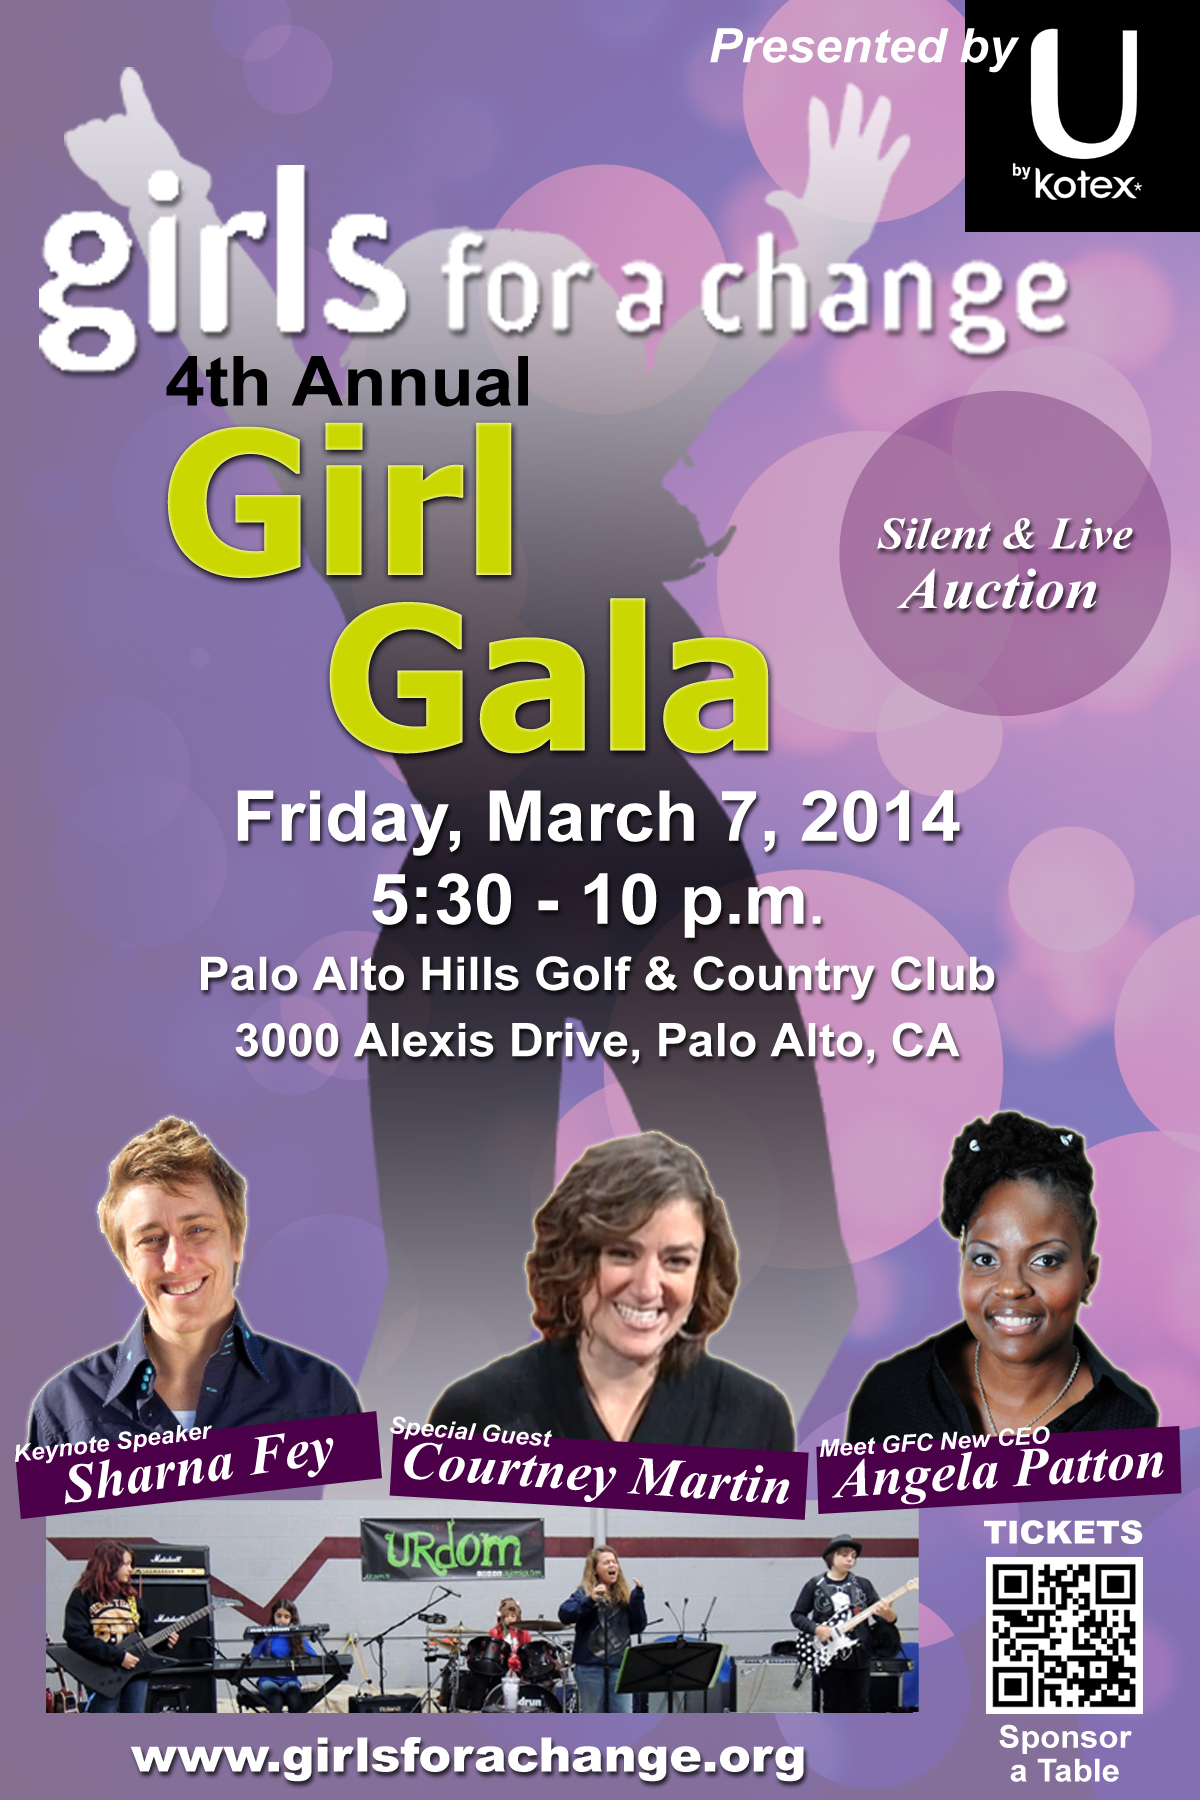 Thank you for supporting Girls For A Change Programs and Events